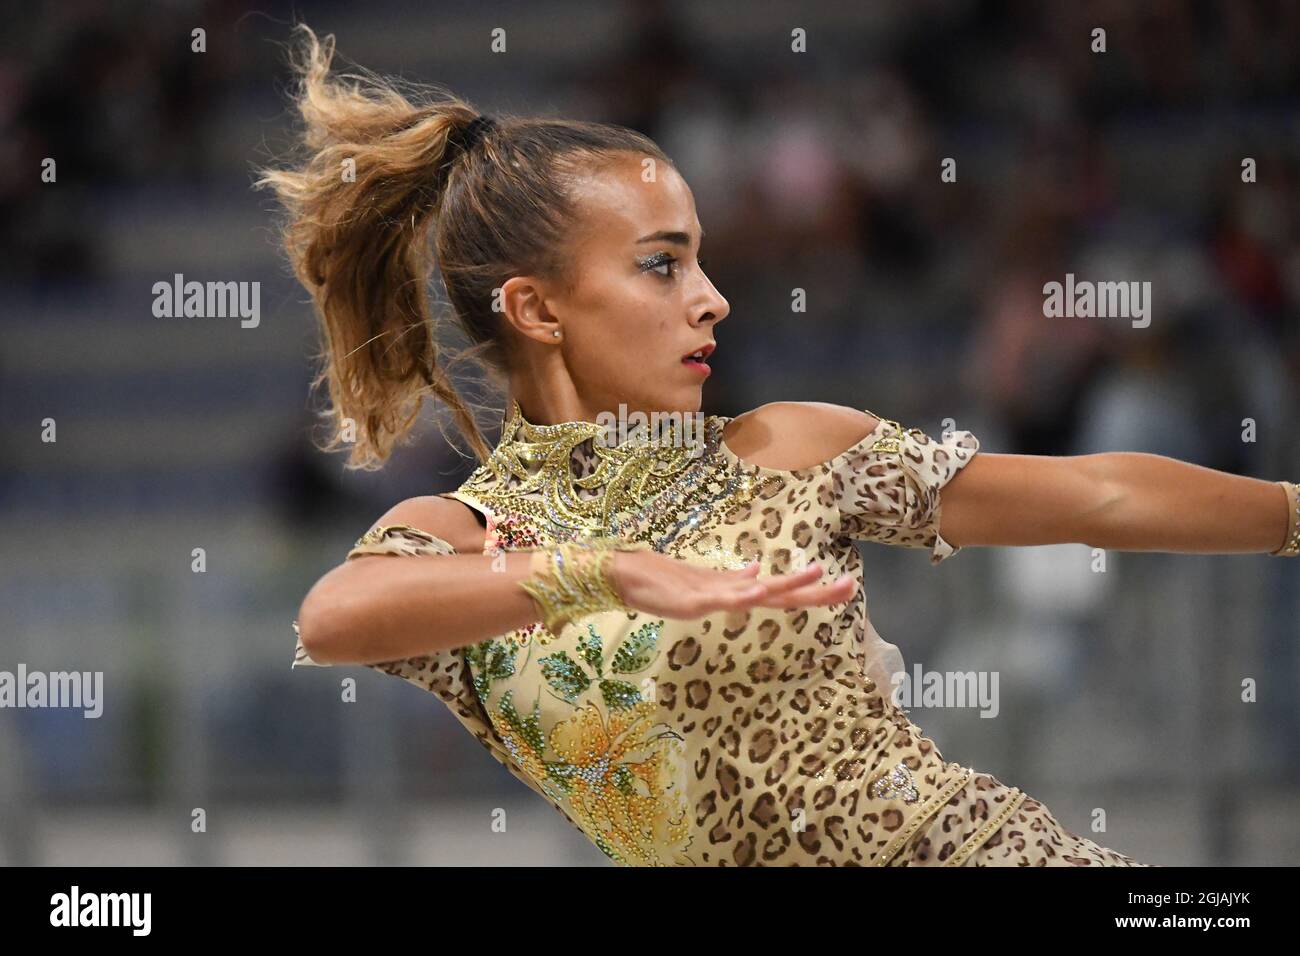 ROBERTA SASSO, Italy, performing in Junior Solo Dance - Free Dance at The European Artistic Roller Skating Championships 2021 at Play Hall, on September 06, 2021 in Riccione, Italy. (Photo by Raniero Corbelletti/AFLO) Stock Photo